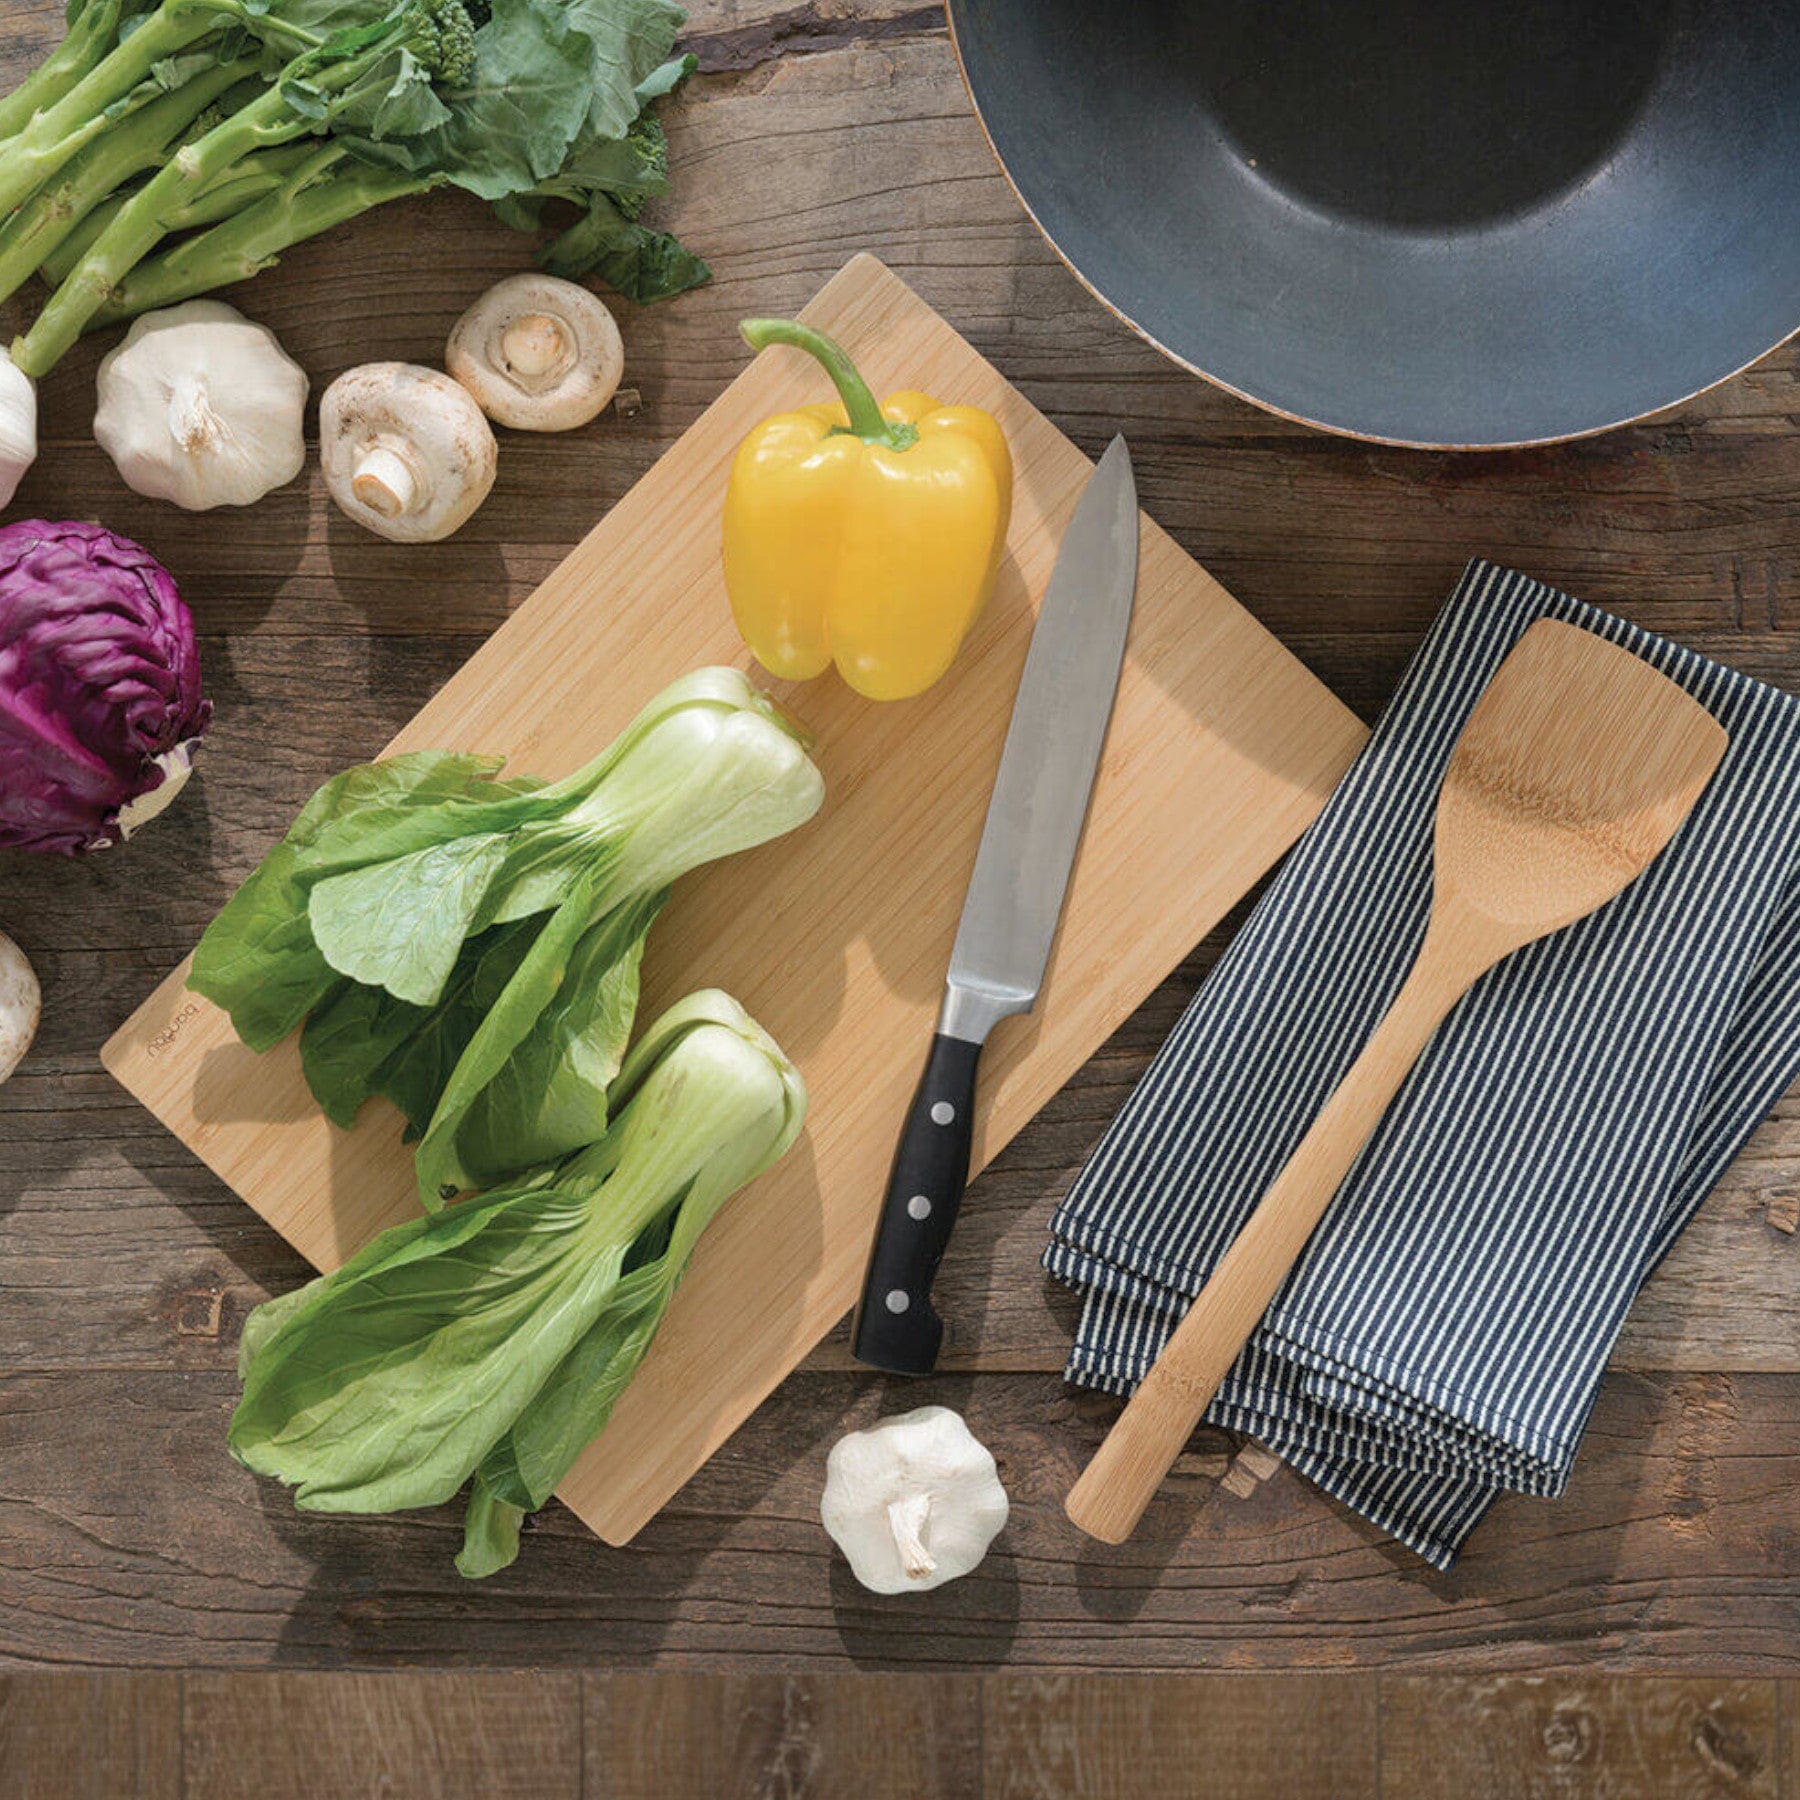 Fresh vegetables on wooden cutting board with chef's knife, wooden spoon, striped kitchen towel, and empty black pan on rustic wood tabletop, ingredients for healthy cooking and meal prep concept.